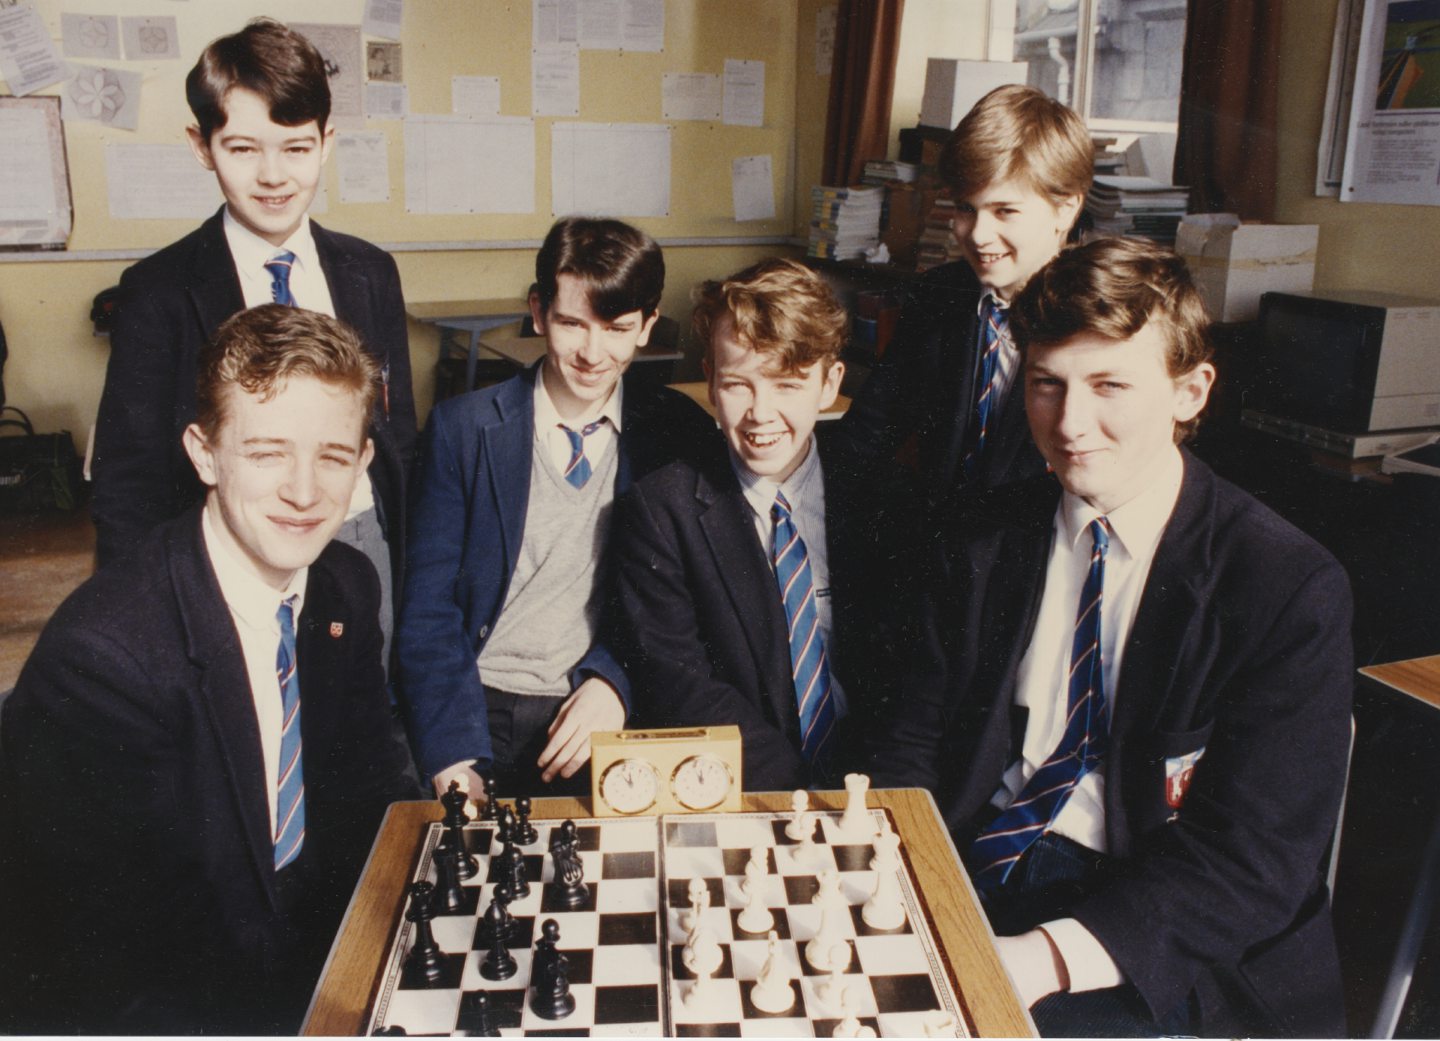 The Aberdeen school's chess team after winning The Times British Championships in 1991.